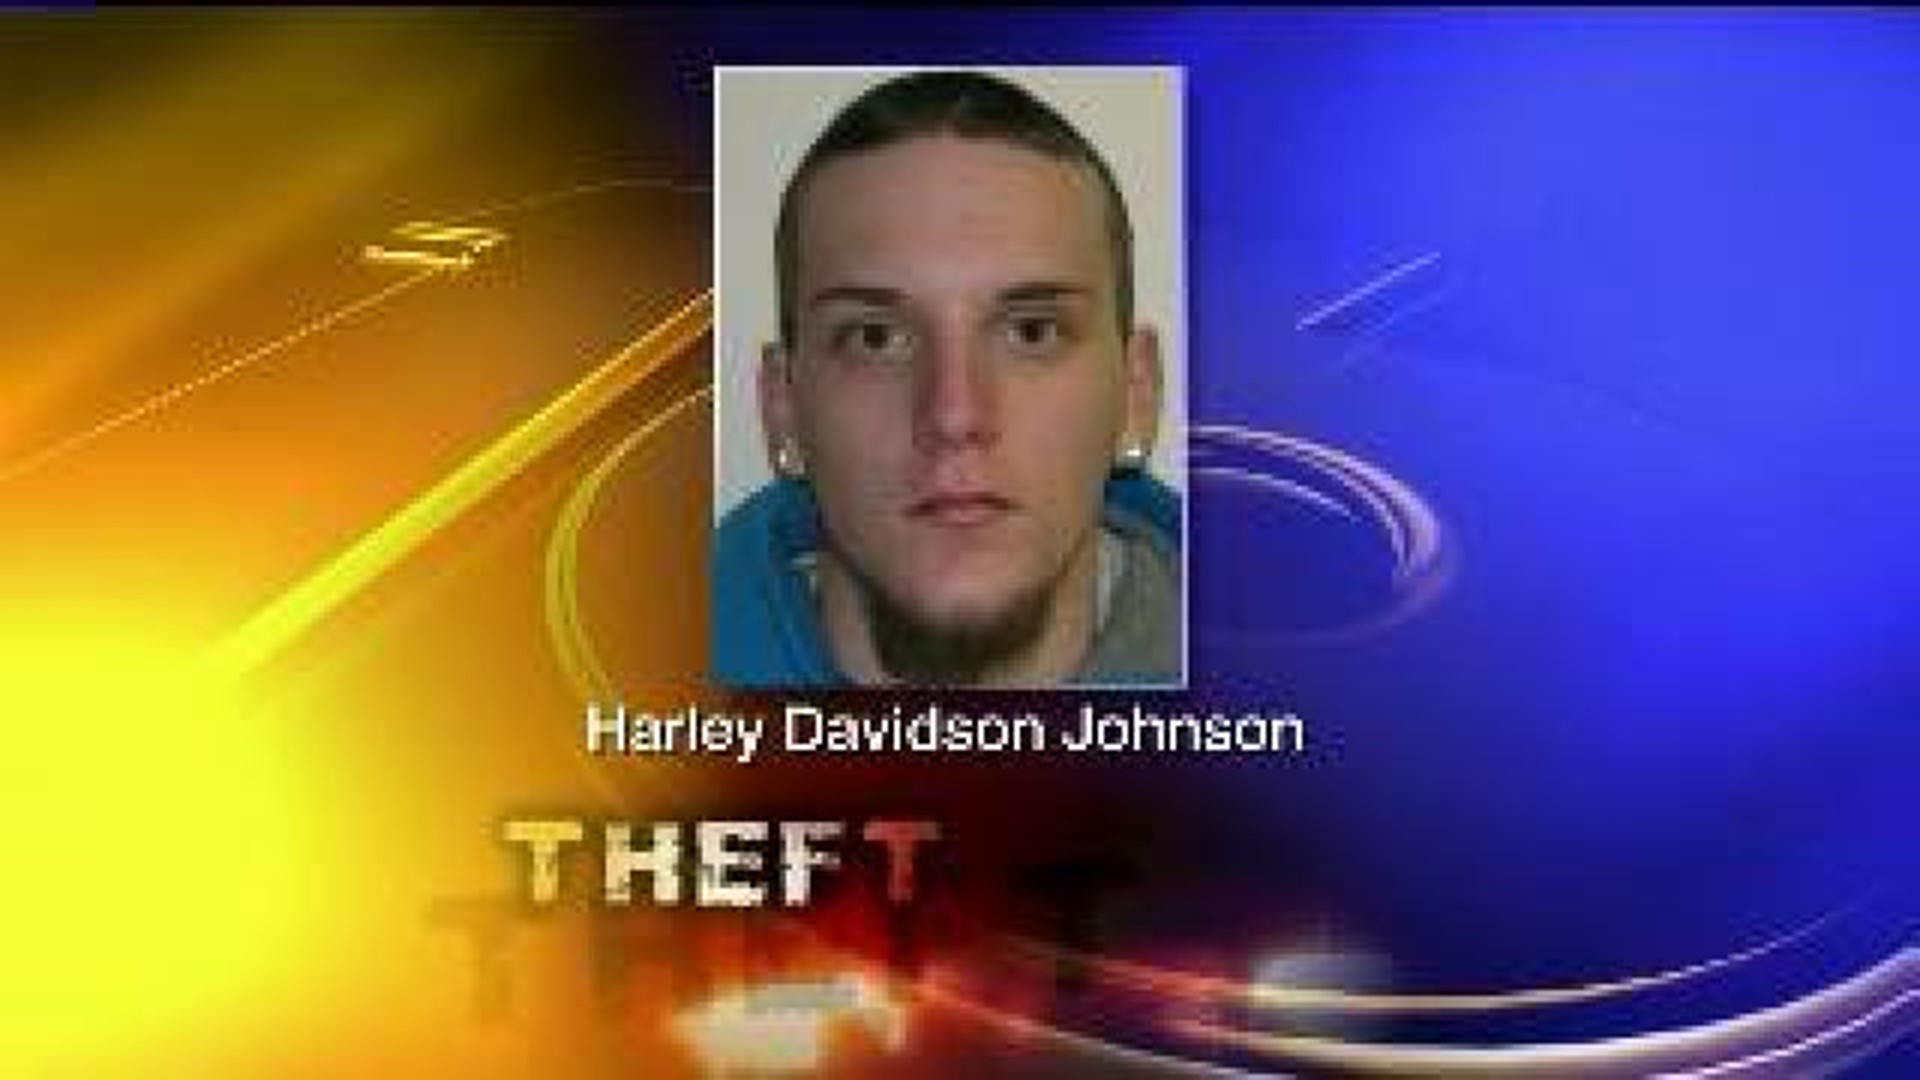 Man Found Sleeping in Laundromat Faces Burglary Charges